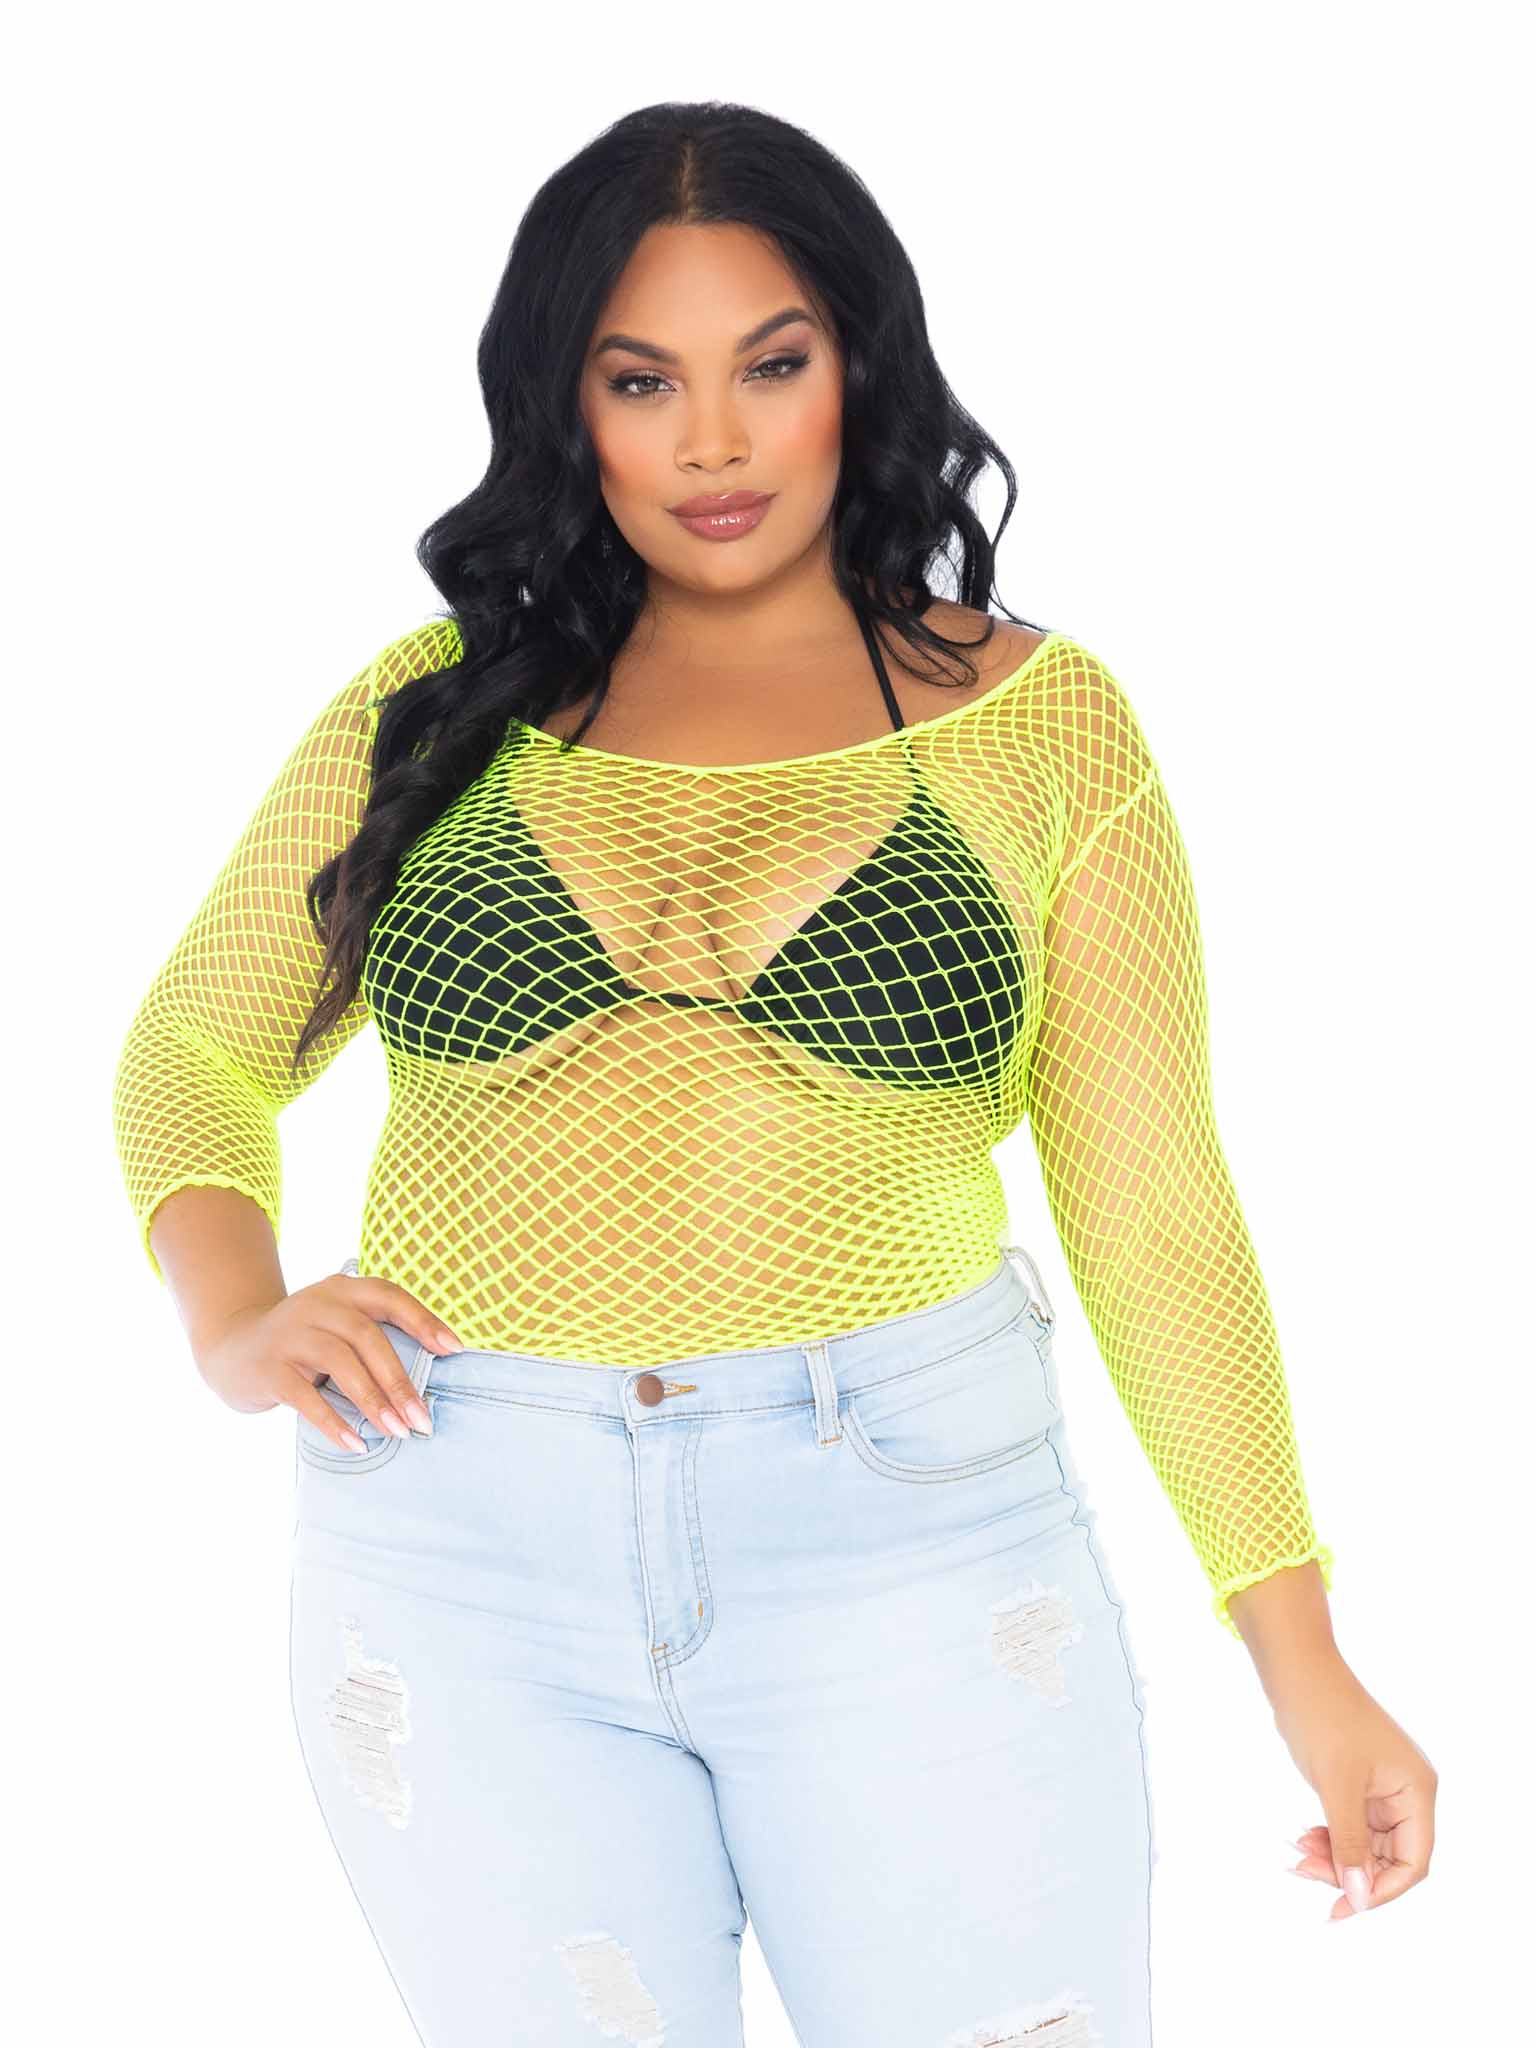 The front of the Neon lime Industrial Net Shirt on plus size model.